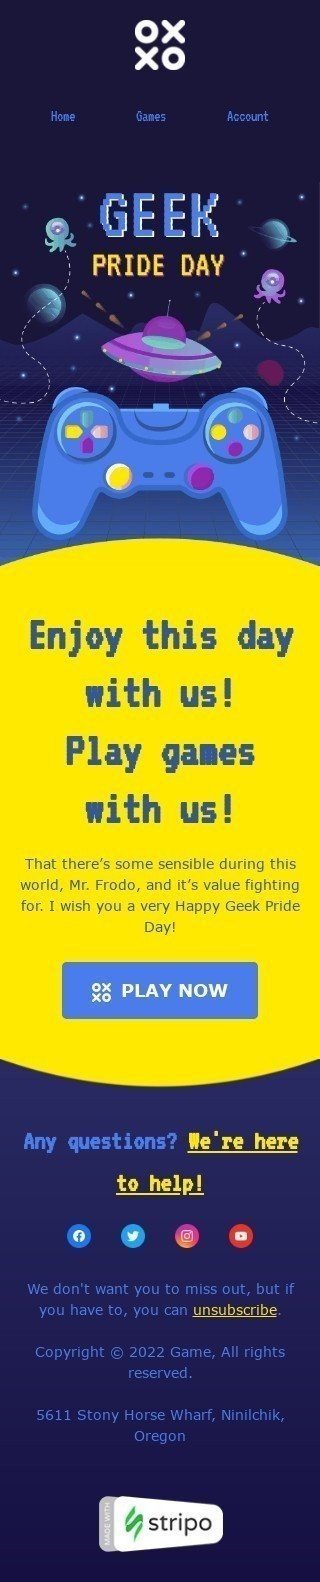 Geek Pride Day Email Template "Play games with us" for Hobbies industry mobile view